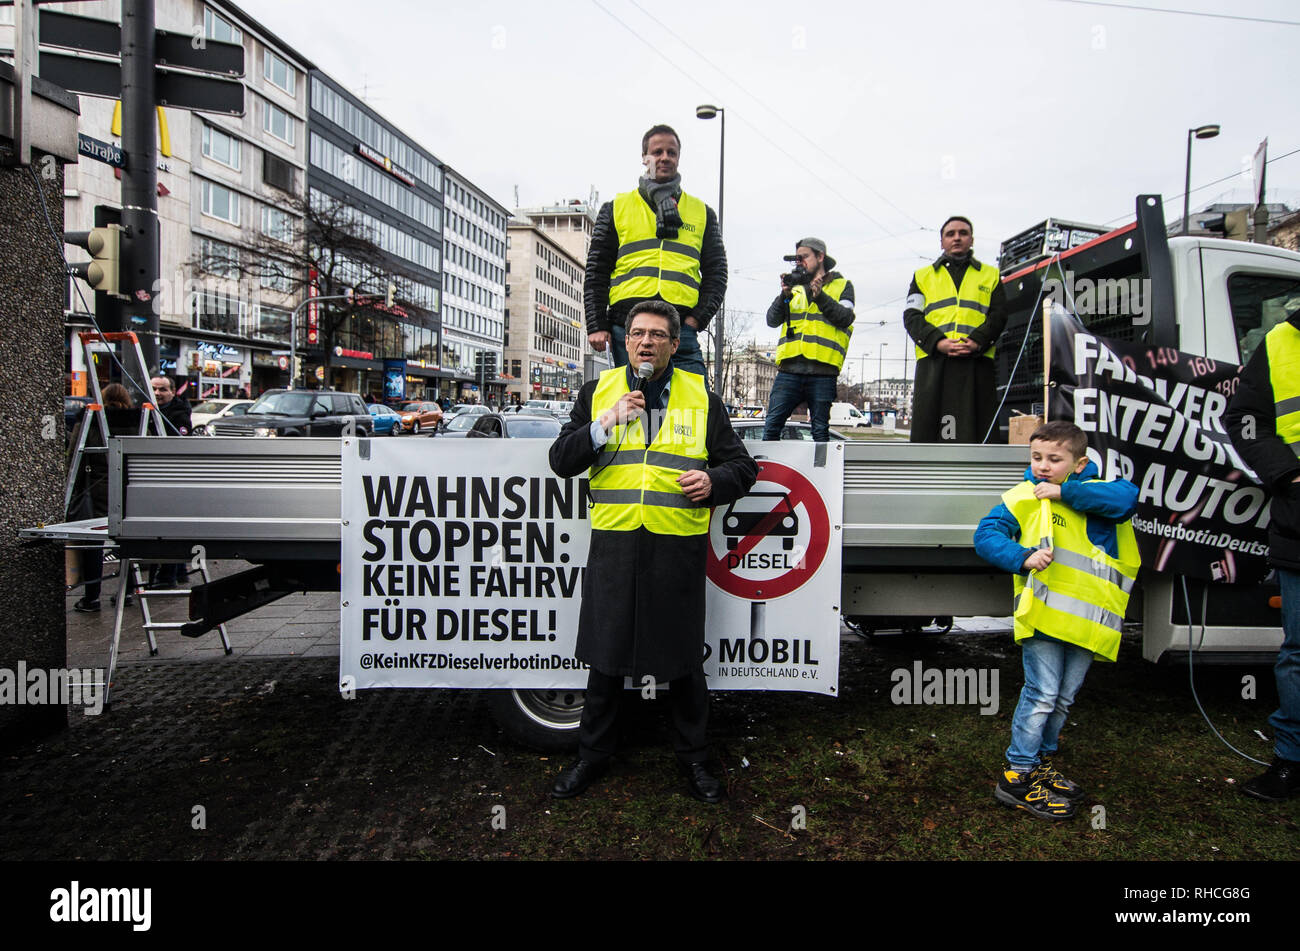 Munich, Bavaria, Germany. 2nd Feb, 2019. Wolfgang Wiehle of the far right Alternative for Germany AfD party supported the group and was also a speaker. Responding to the prospect of diesel auto bans in major cities in Germany, protestors assembled at an air quality monitoring station in Munich's city center. The event was organized by the Mobil in Deutschland automobile club and is the first protest against the diesel ban in Munich- the home of BMW. Numerous well-known right-extremists and far-right political figures were in attendance and participated, including numerous members of t Credit: Stock Photo